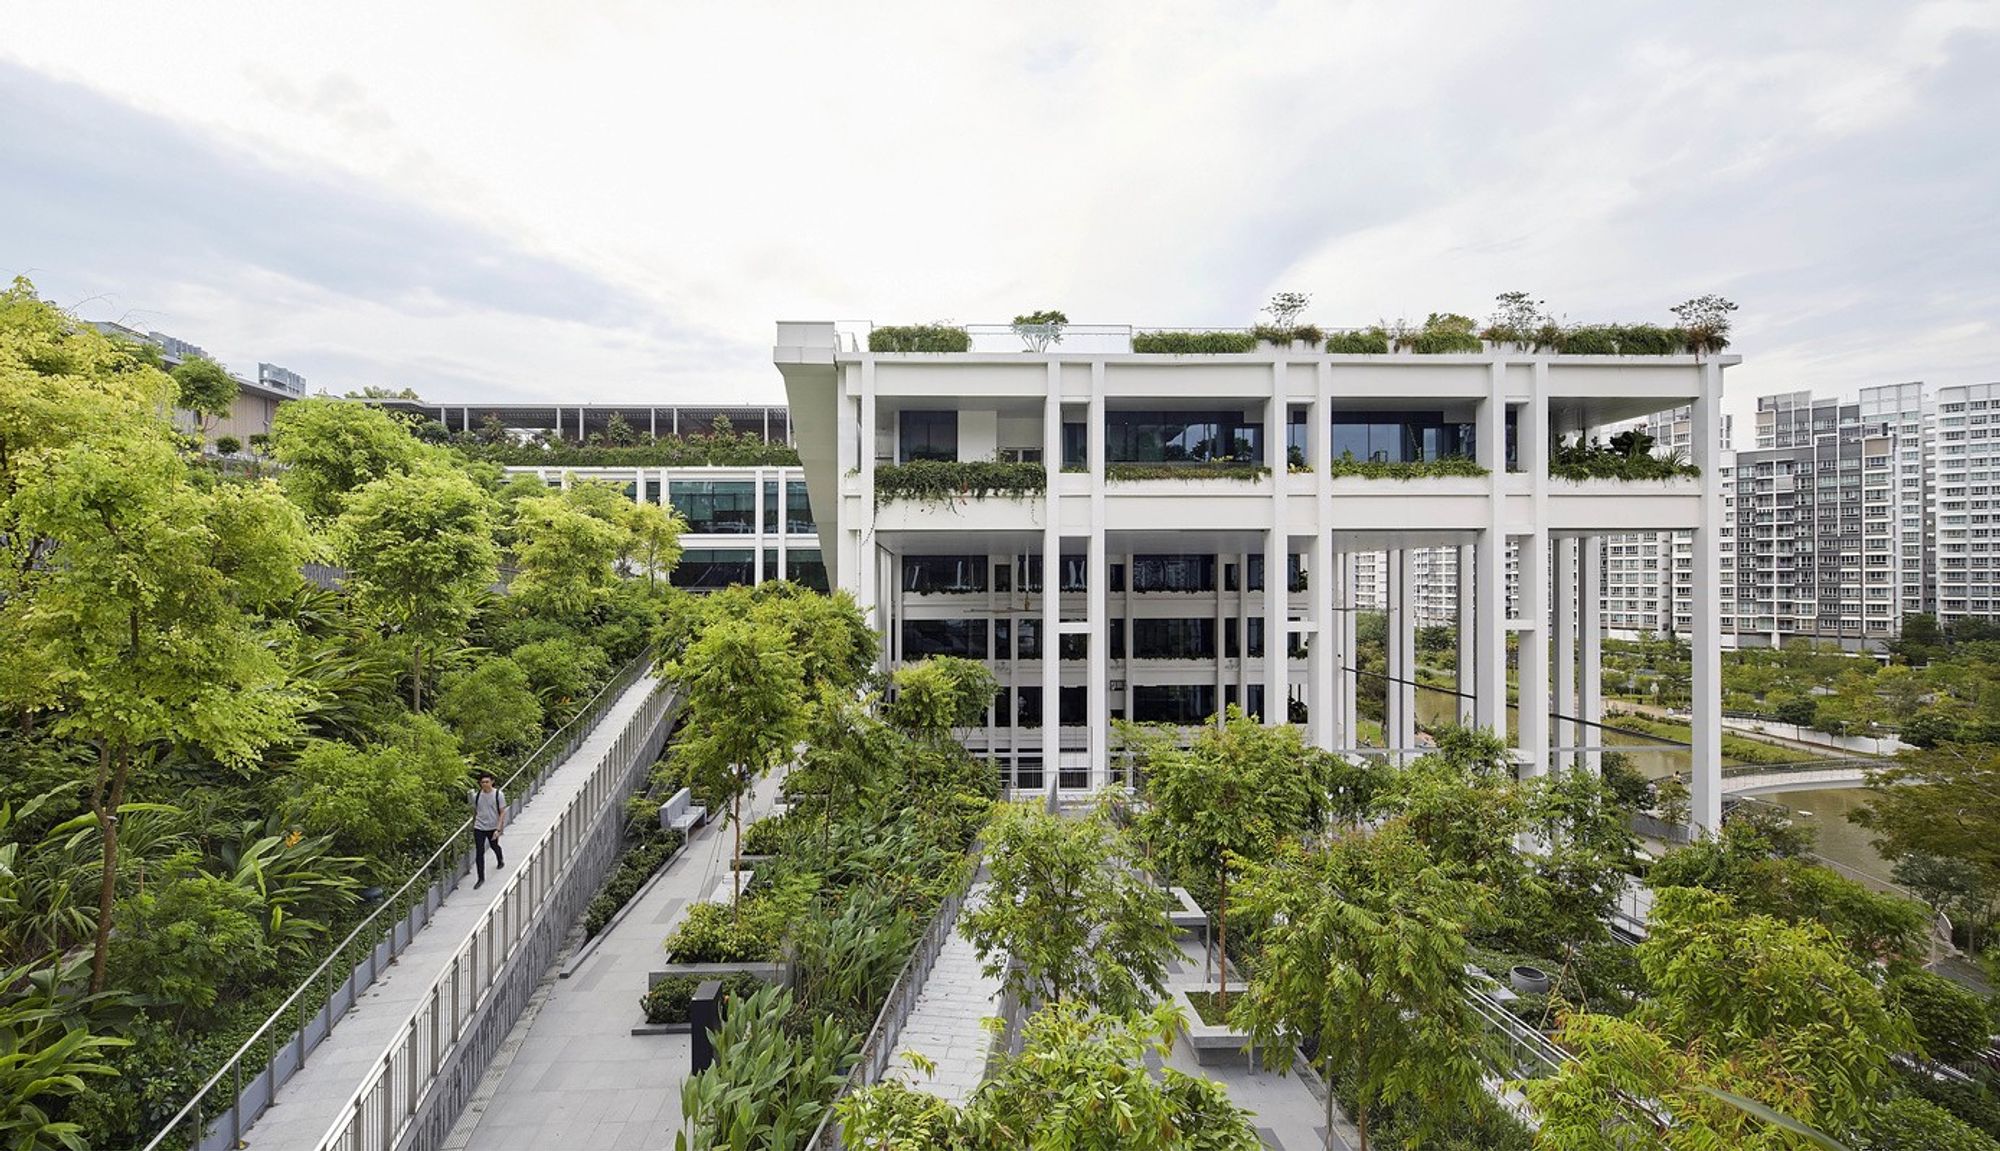 Oasis Terraces (Punggol Polyclinic) by Serie Architects.
